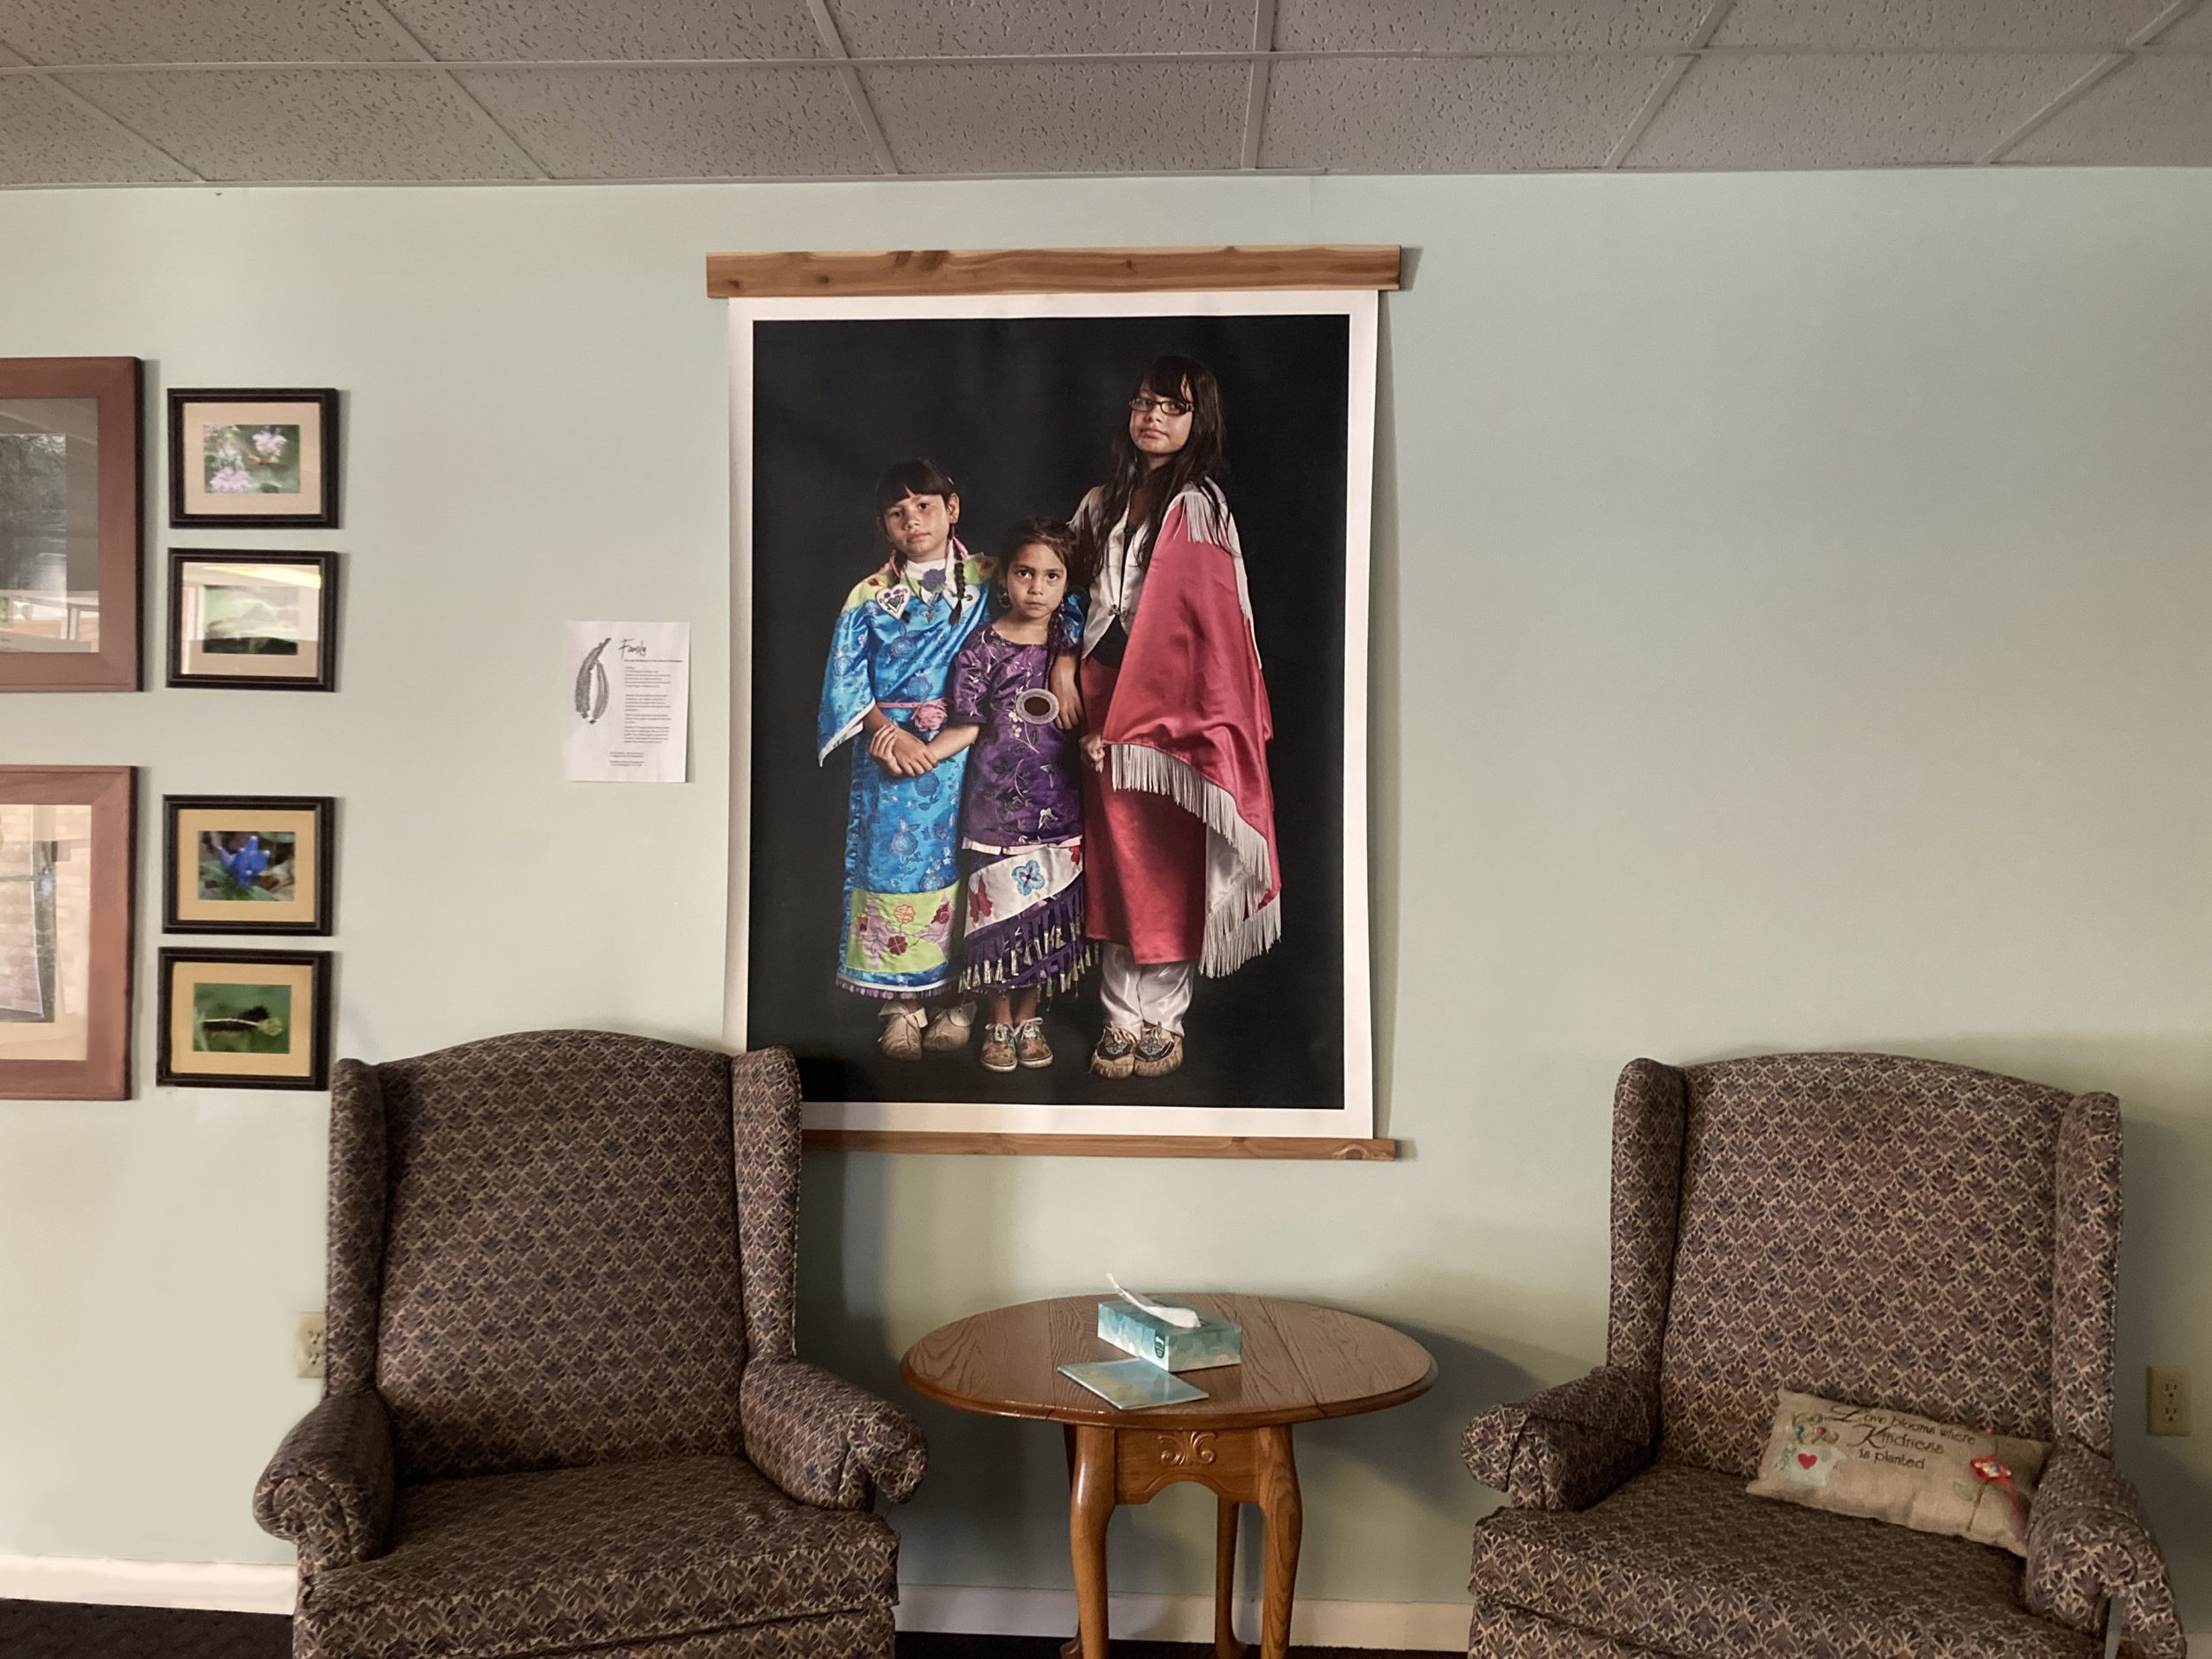   A photograph by Potawatomi artist Sharon Hoogstraten hangs in the foyer at Waterford Mennonite Church. The portrait features three Potawatomi dancers, Selphie, age 8, Lilly, age 6, and Mimike, age 10. Sharon, from Kalamazoo, Michigan, said in a sta